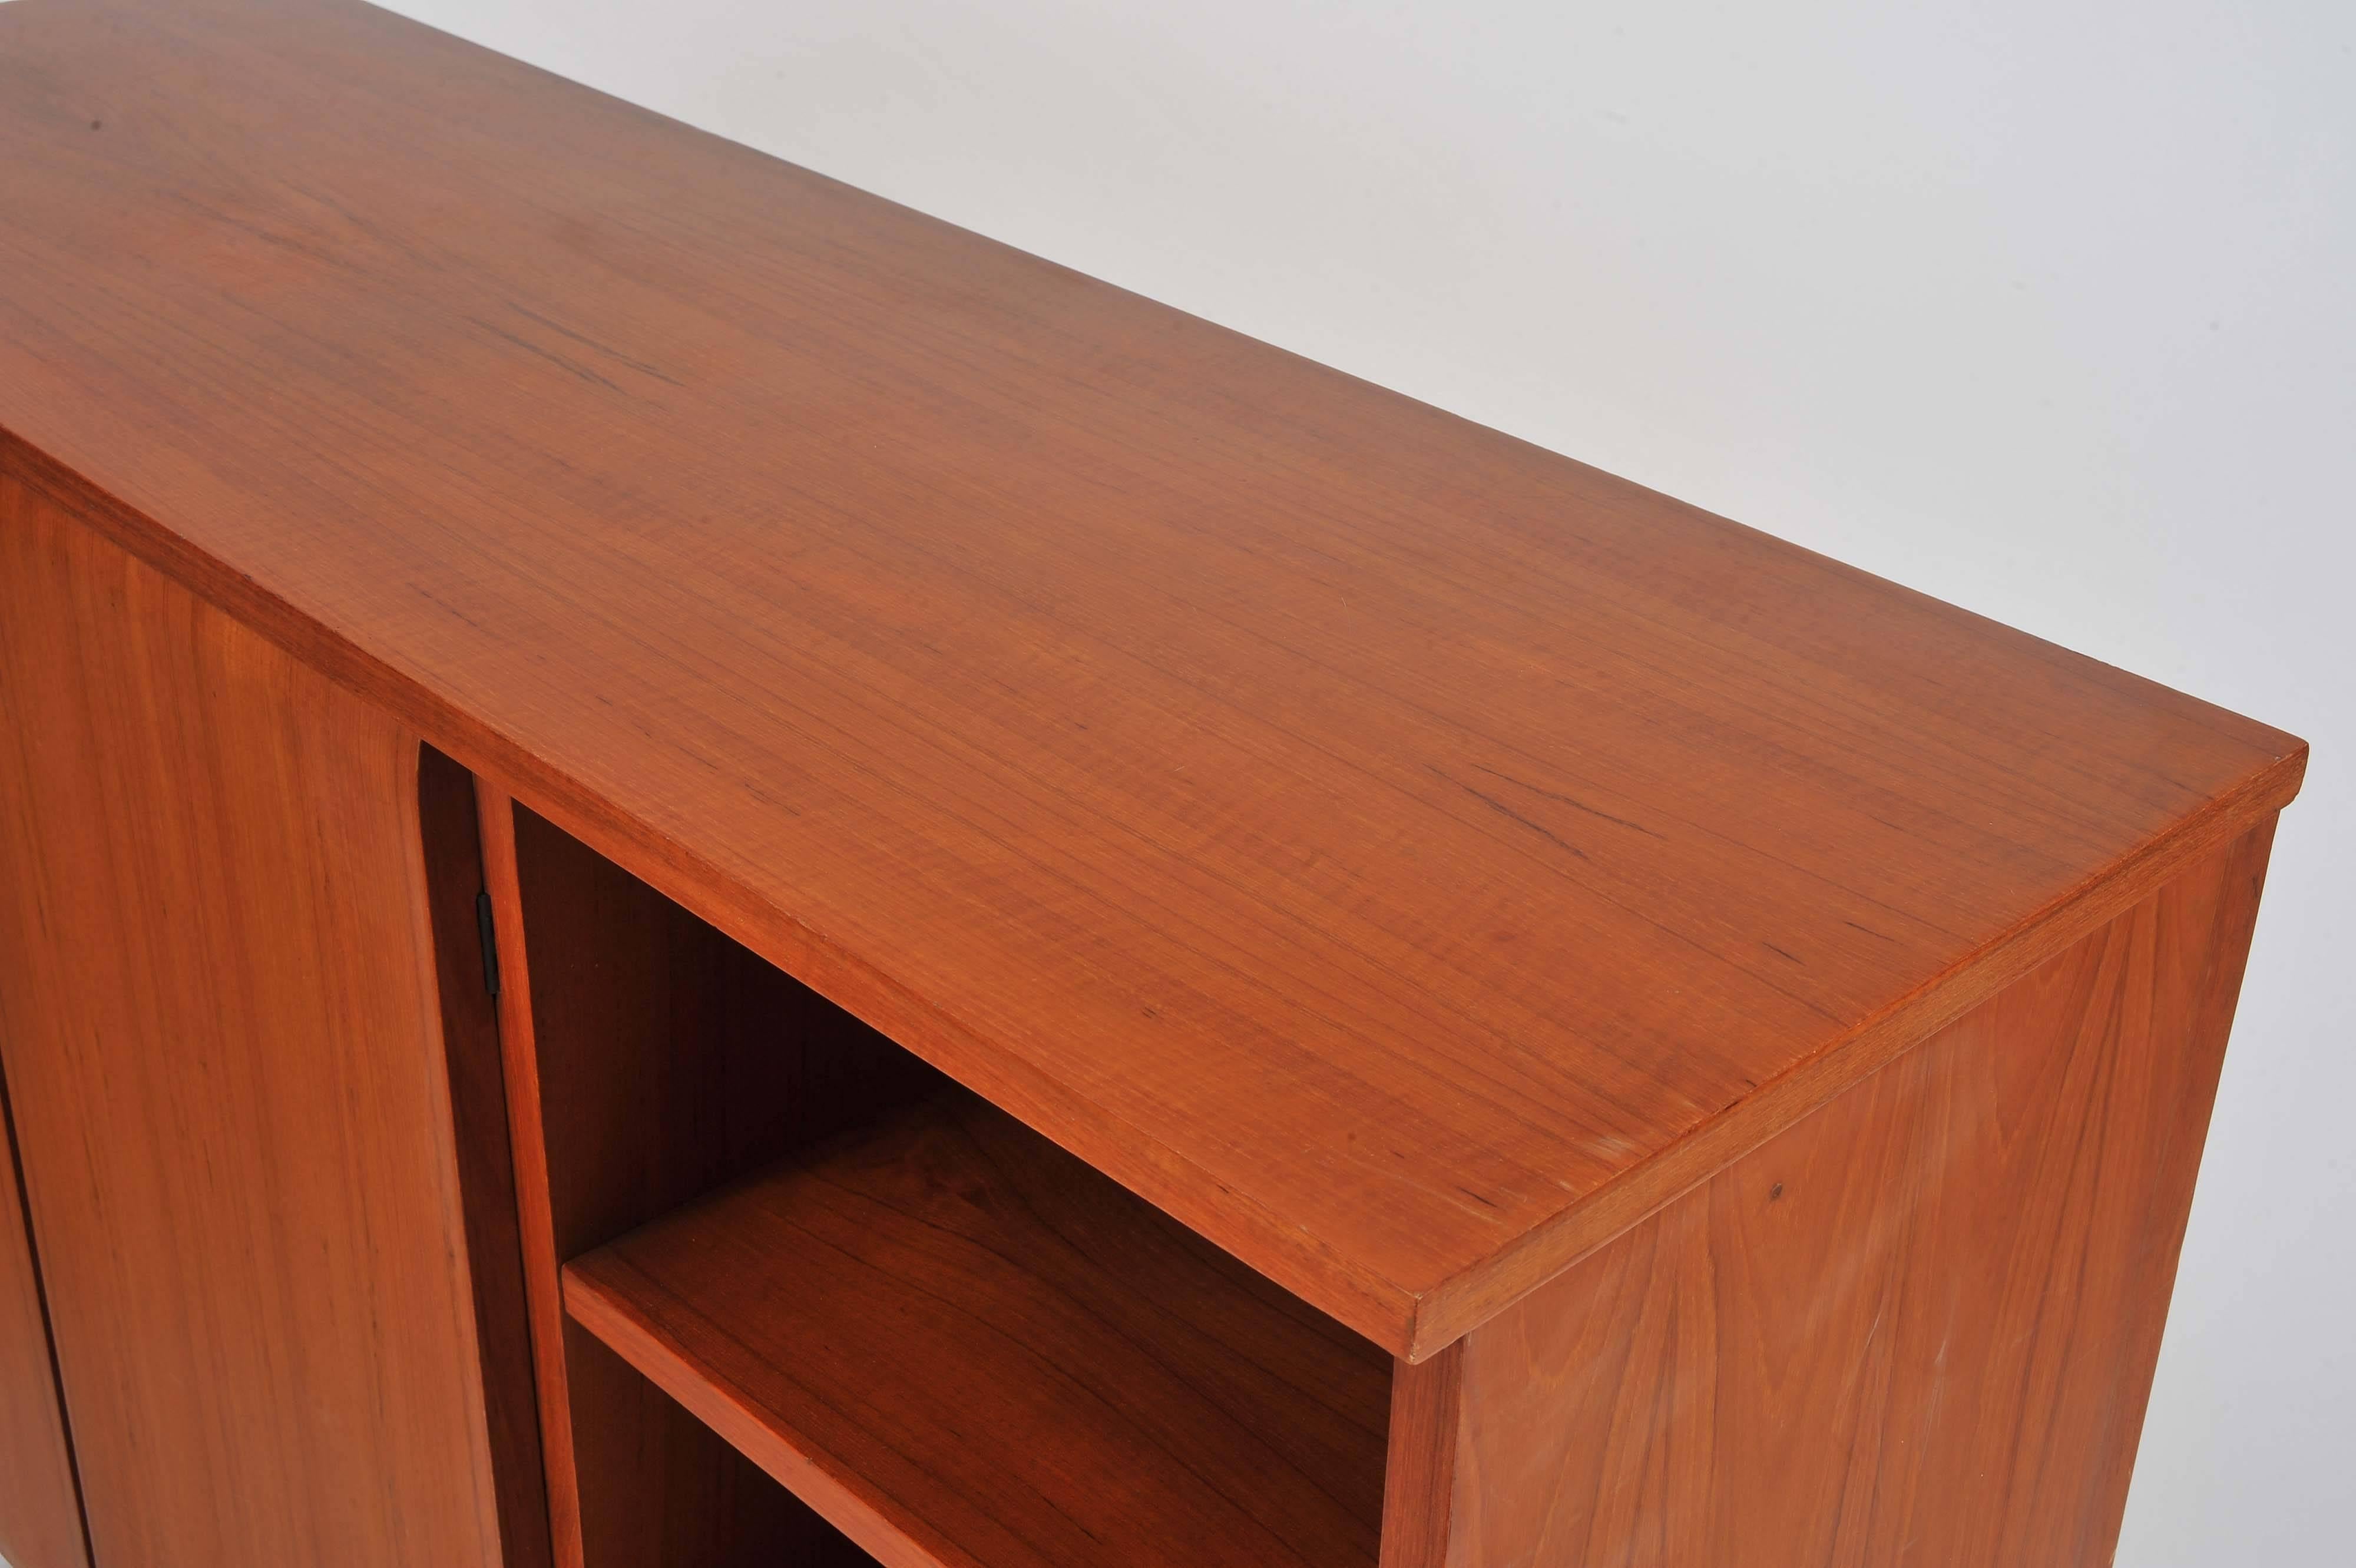 Sideboard in Cherry Wood 3